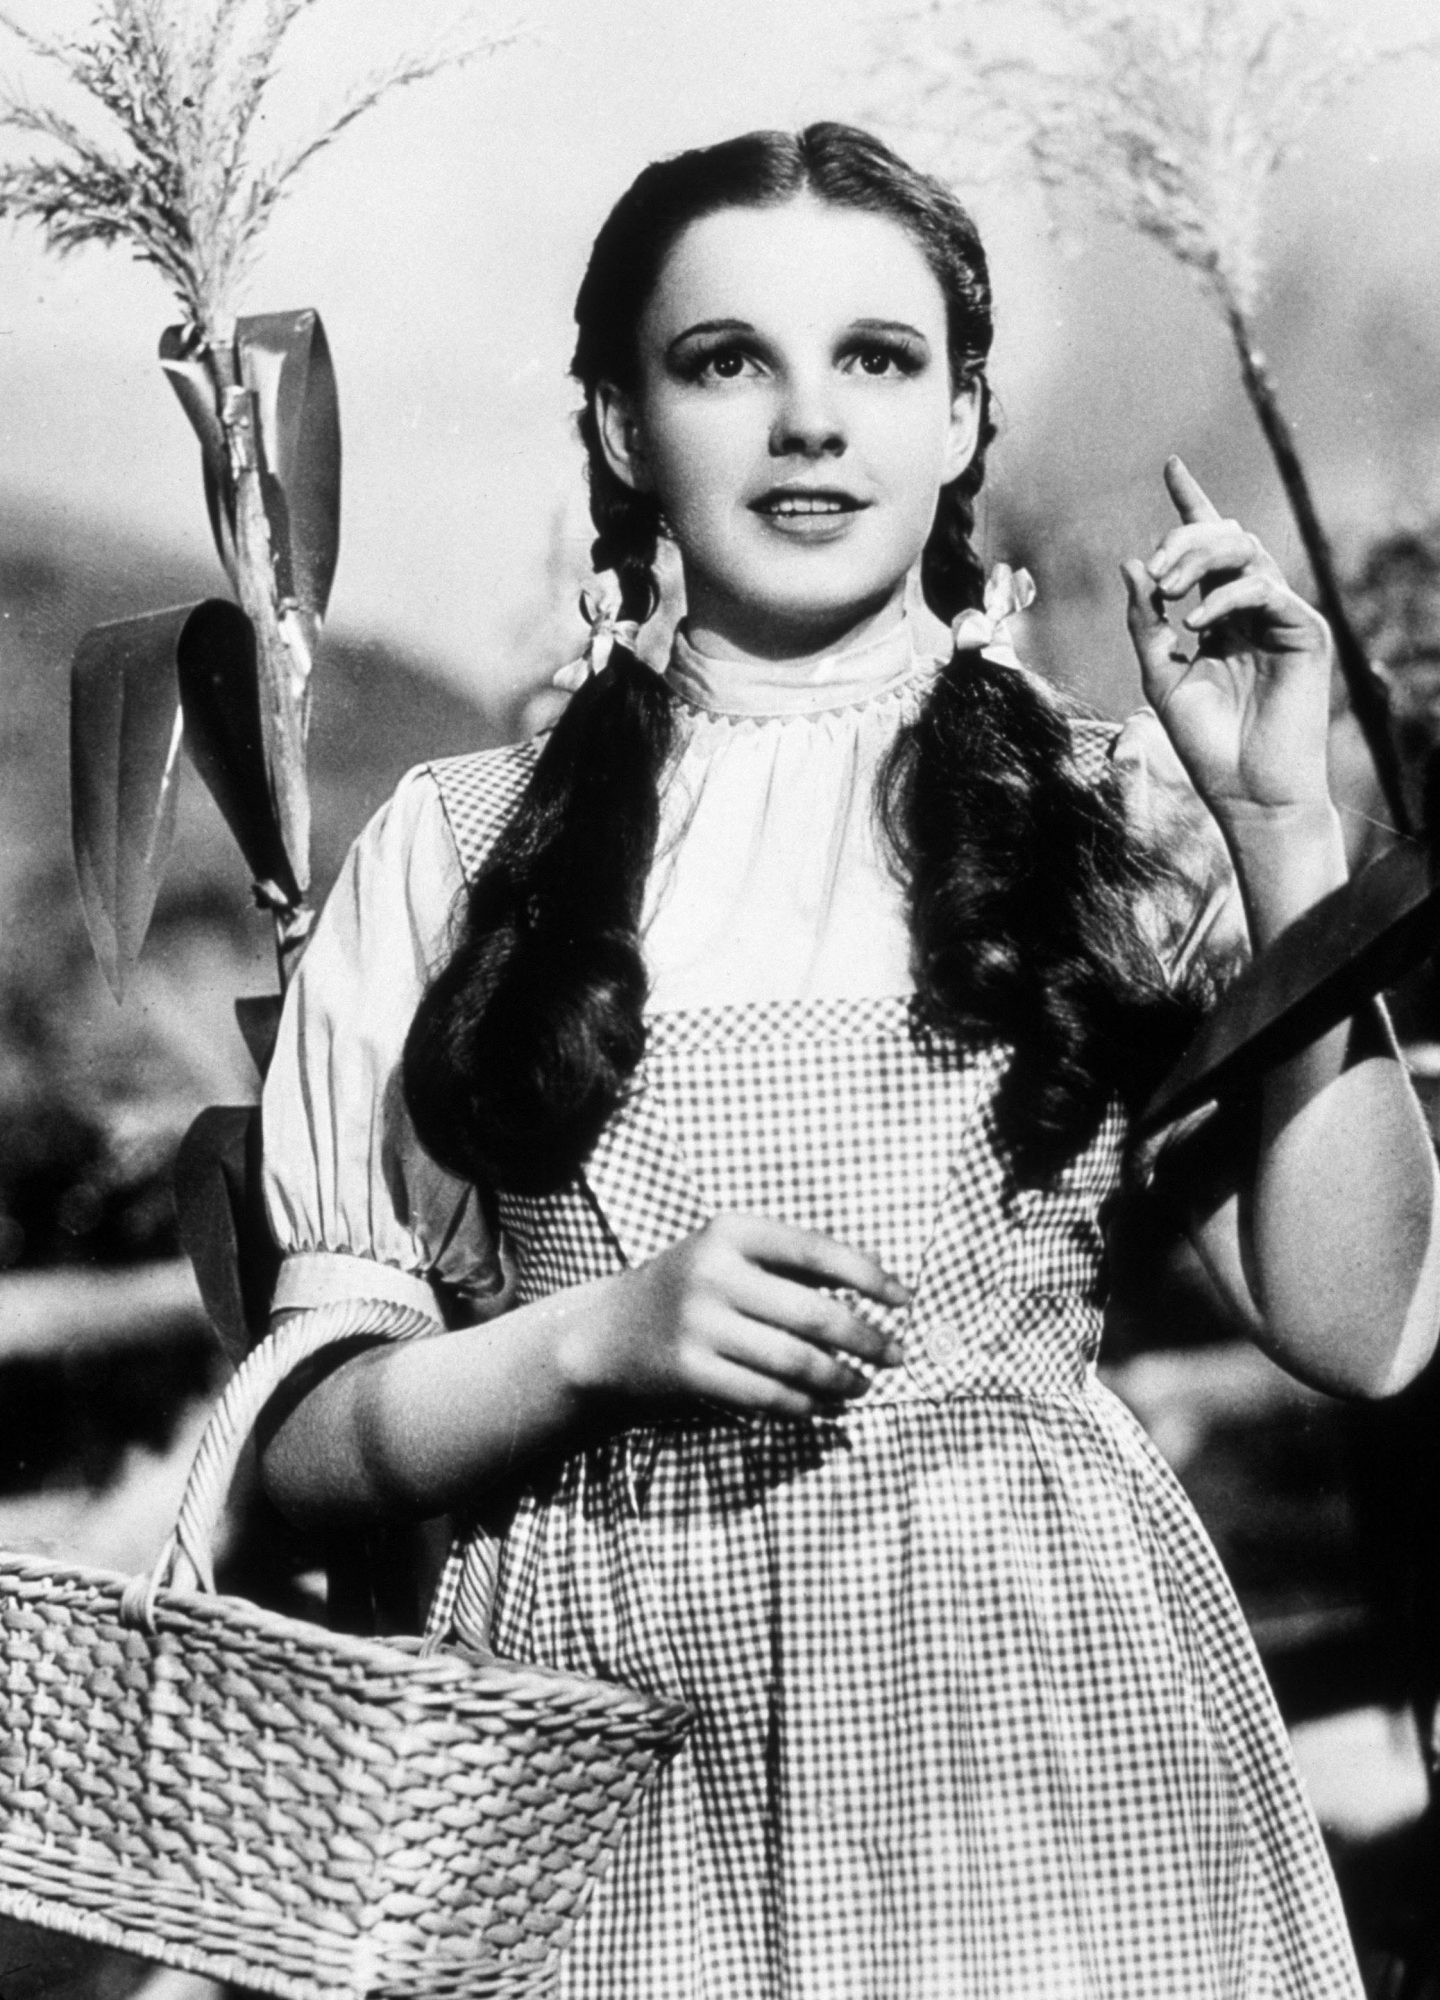 Long-Lost Wizard of Oz Dress Worn by Judy Garland Is Up for Auction After Being Found Again